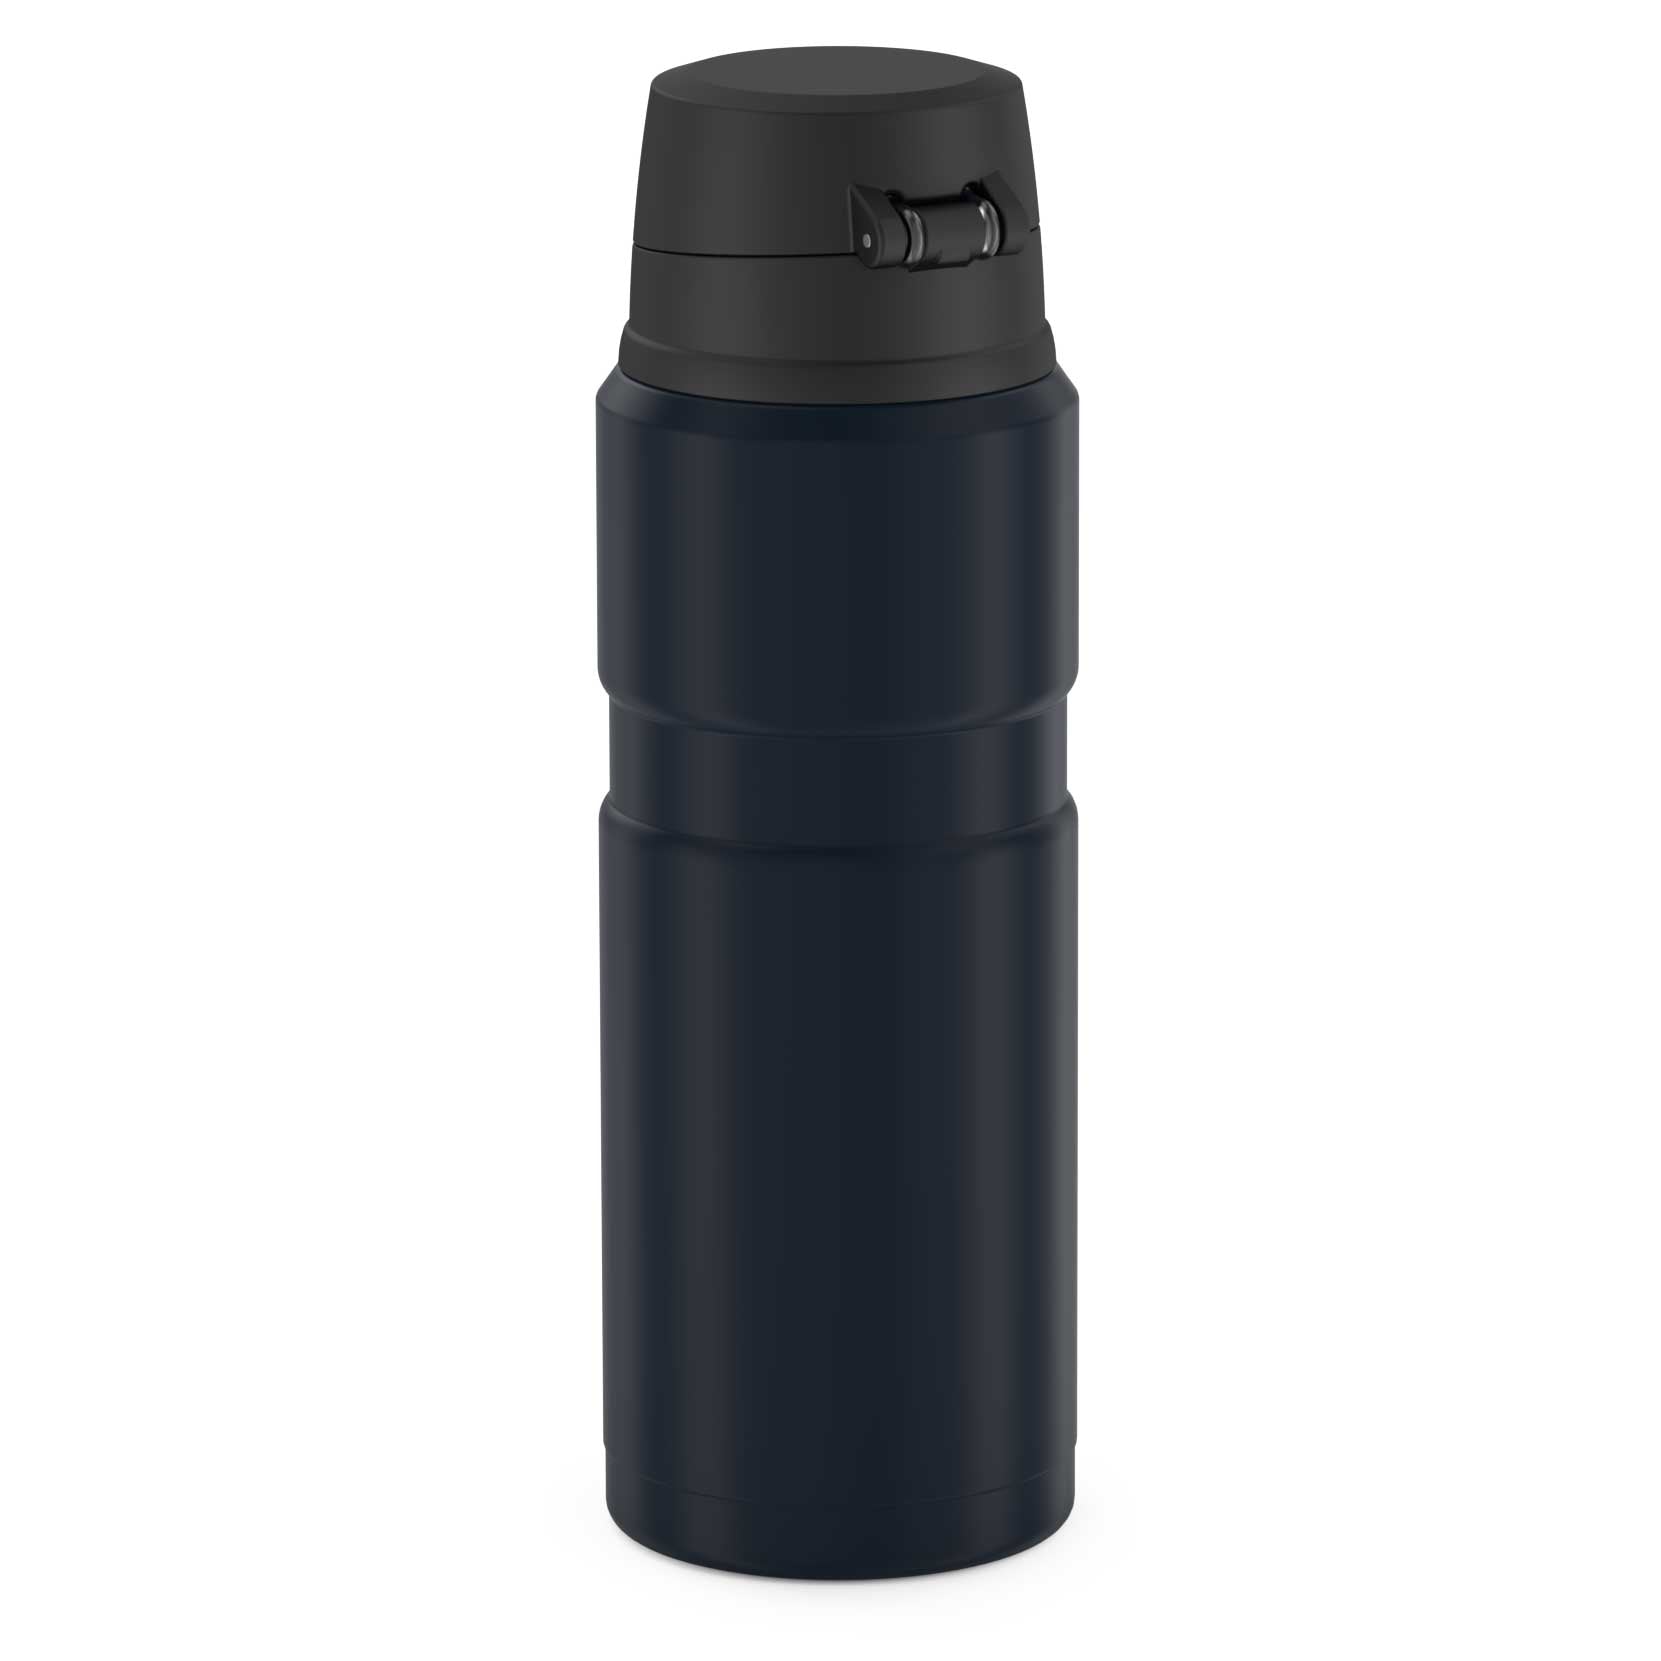 Space Shuttle Enterprise Black 8 oz Thermos King Seeley with Lid